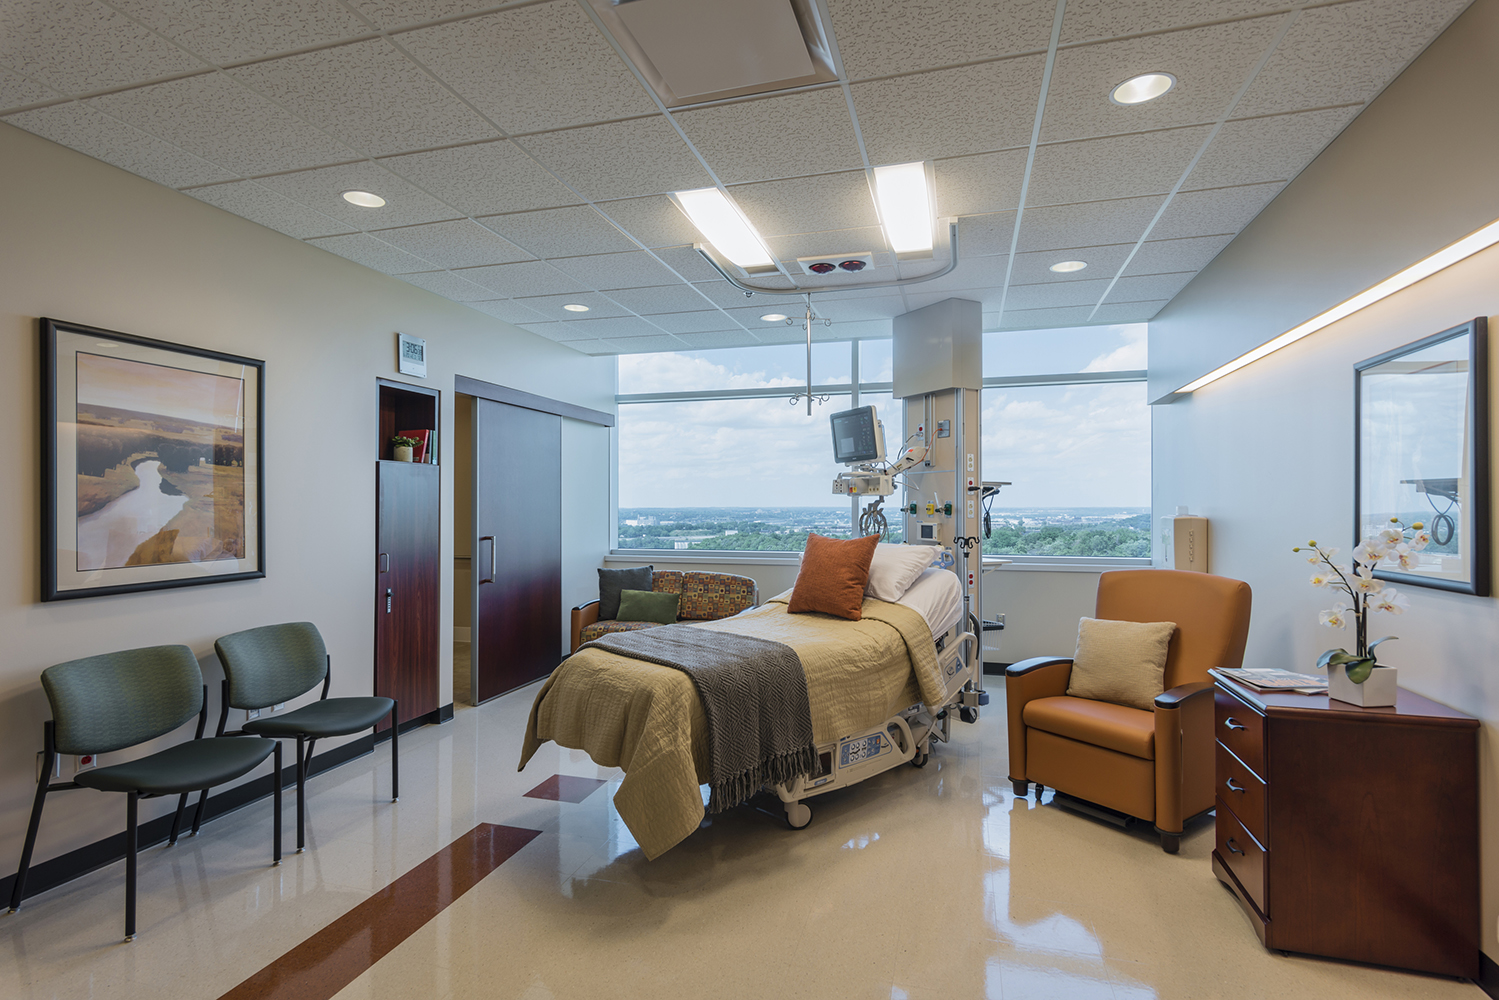 Unity patient room lighting over a patient bed in front of a wide window.